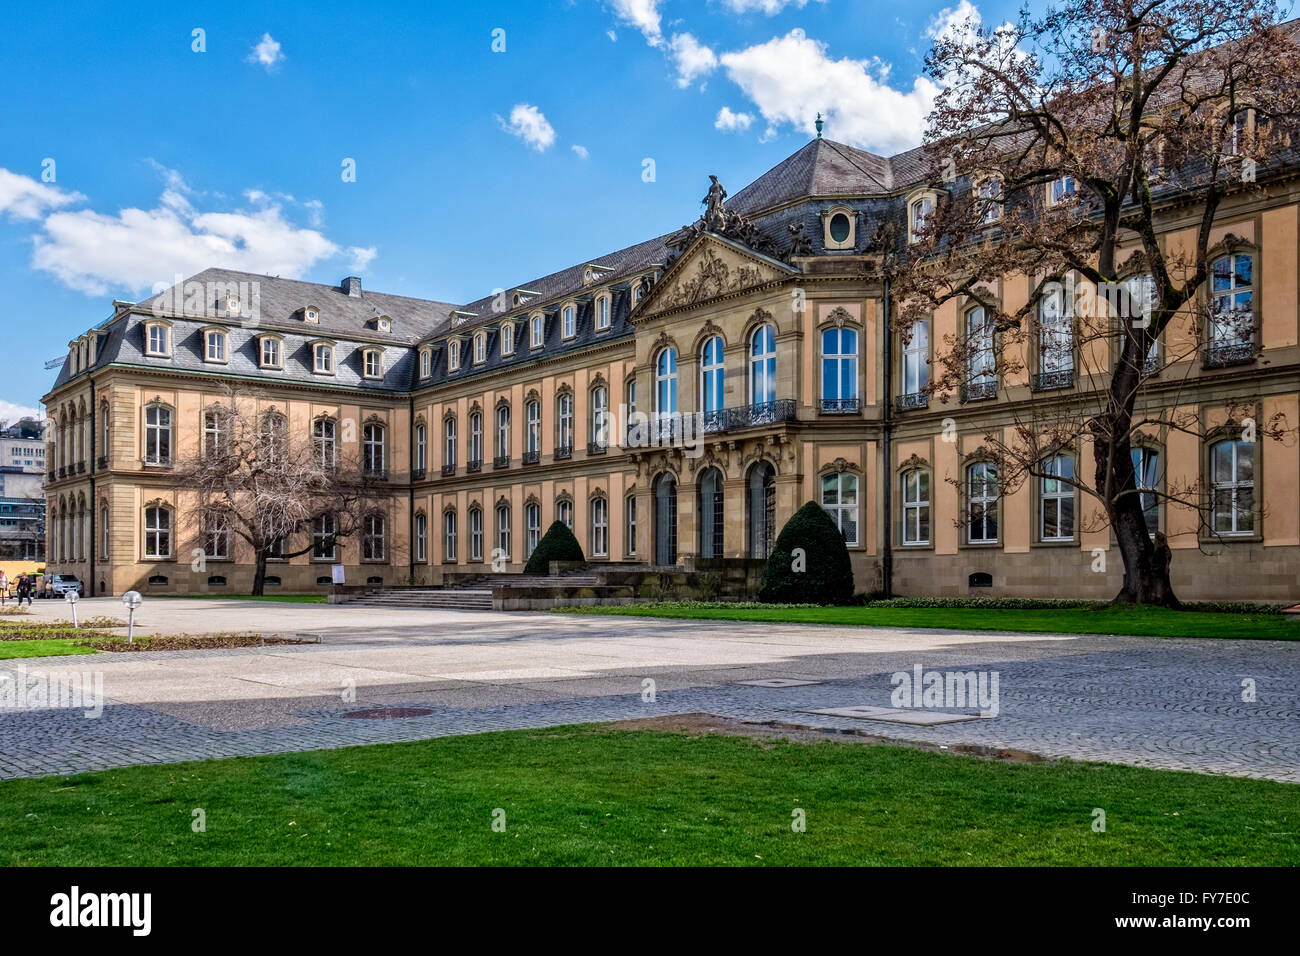 Side view of Neues Schloss, New Palace building of Stuttgart, Baden-Württemberg, Germany Stock Photo